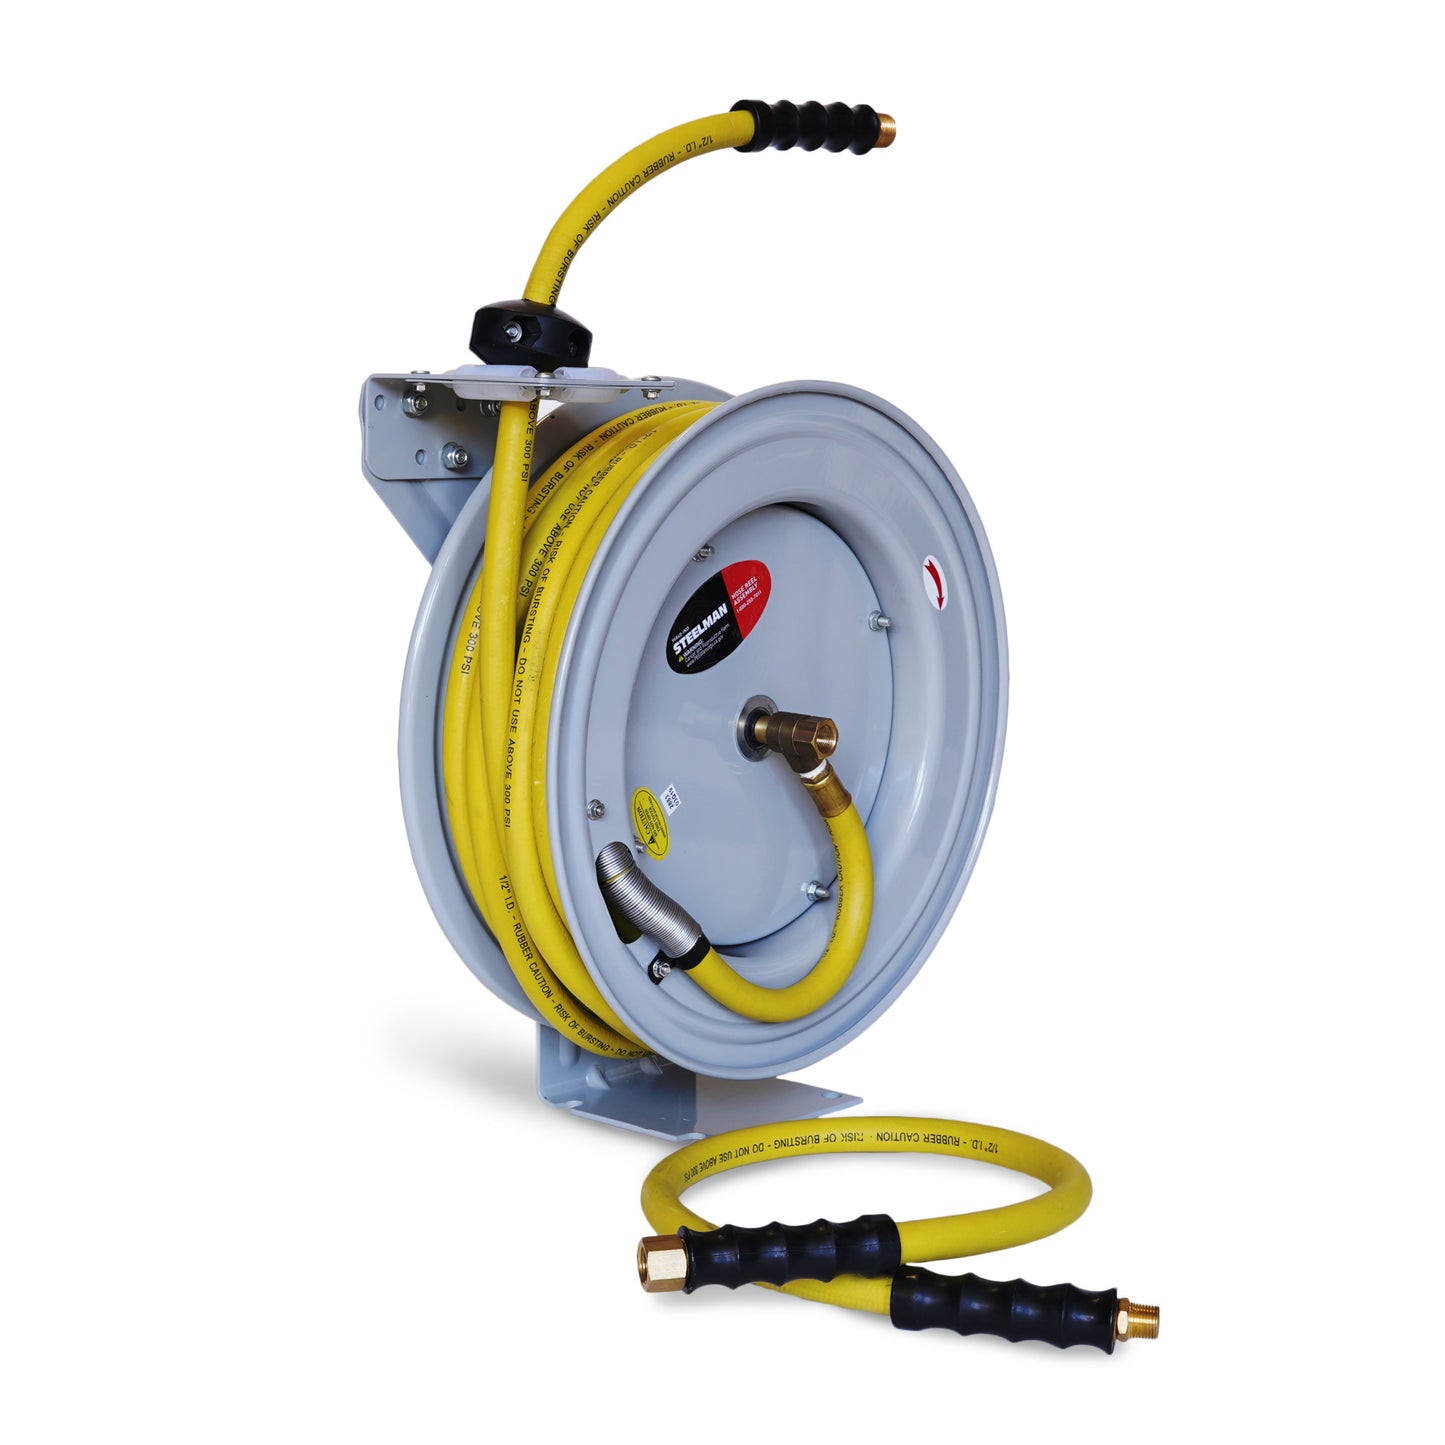 Steelman 96840-IND Enclosed Spring Garden Center Water / Pneumatic Hose Reel with 50-Foot 1/2-Inch ID Hose